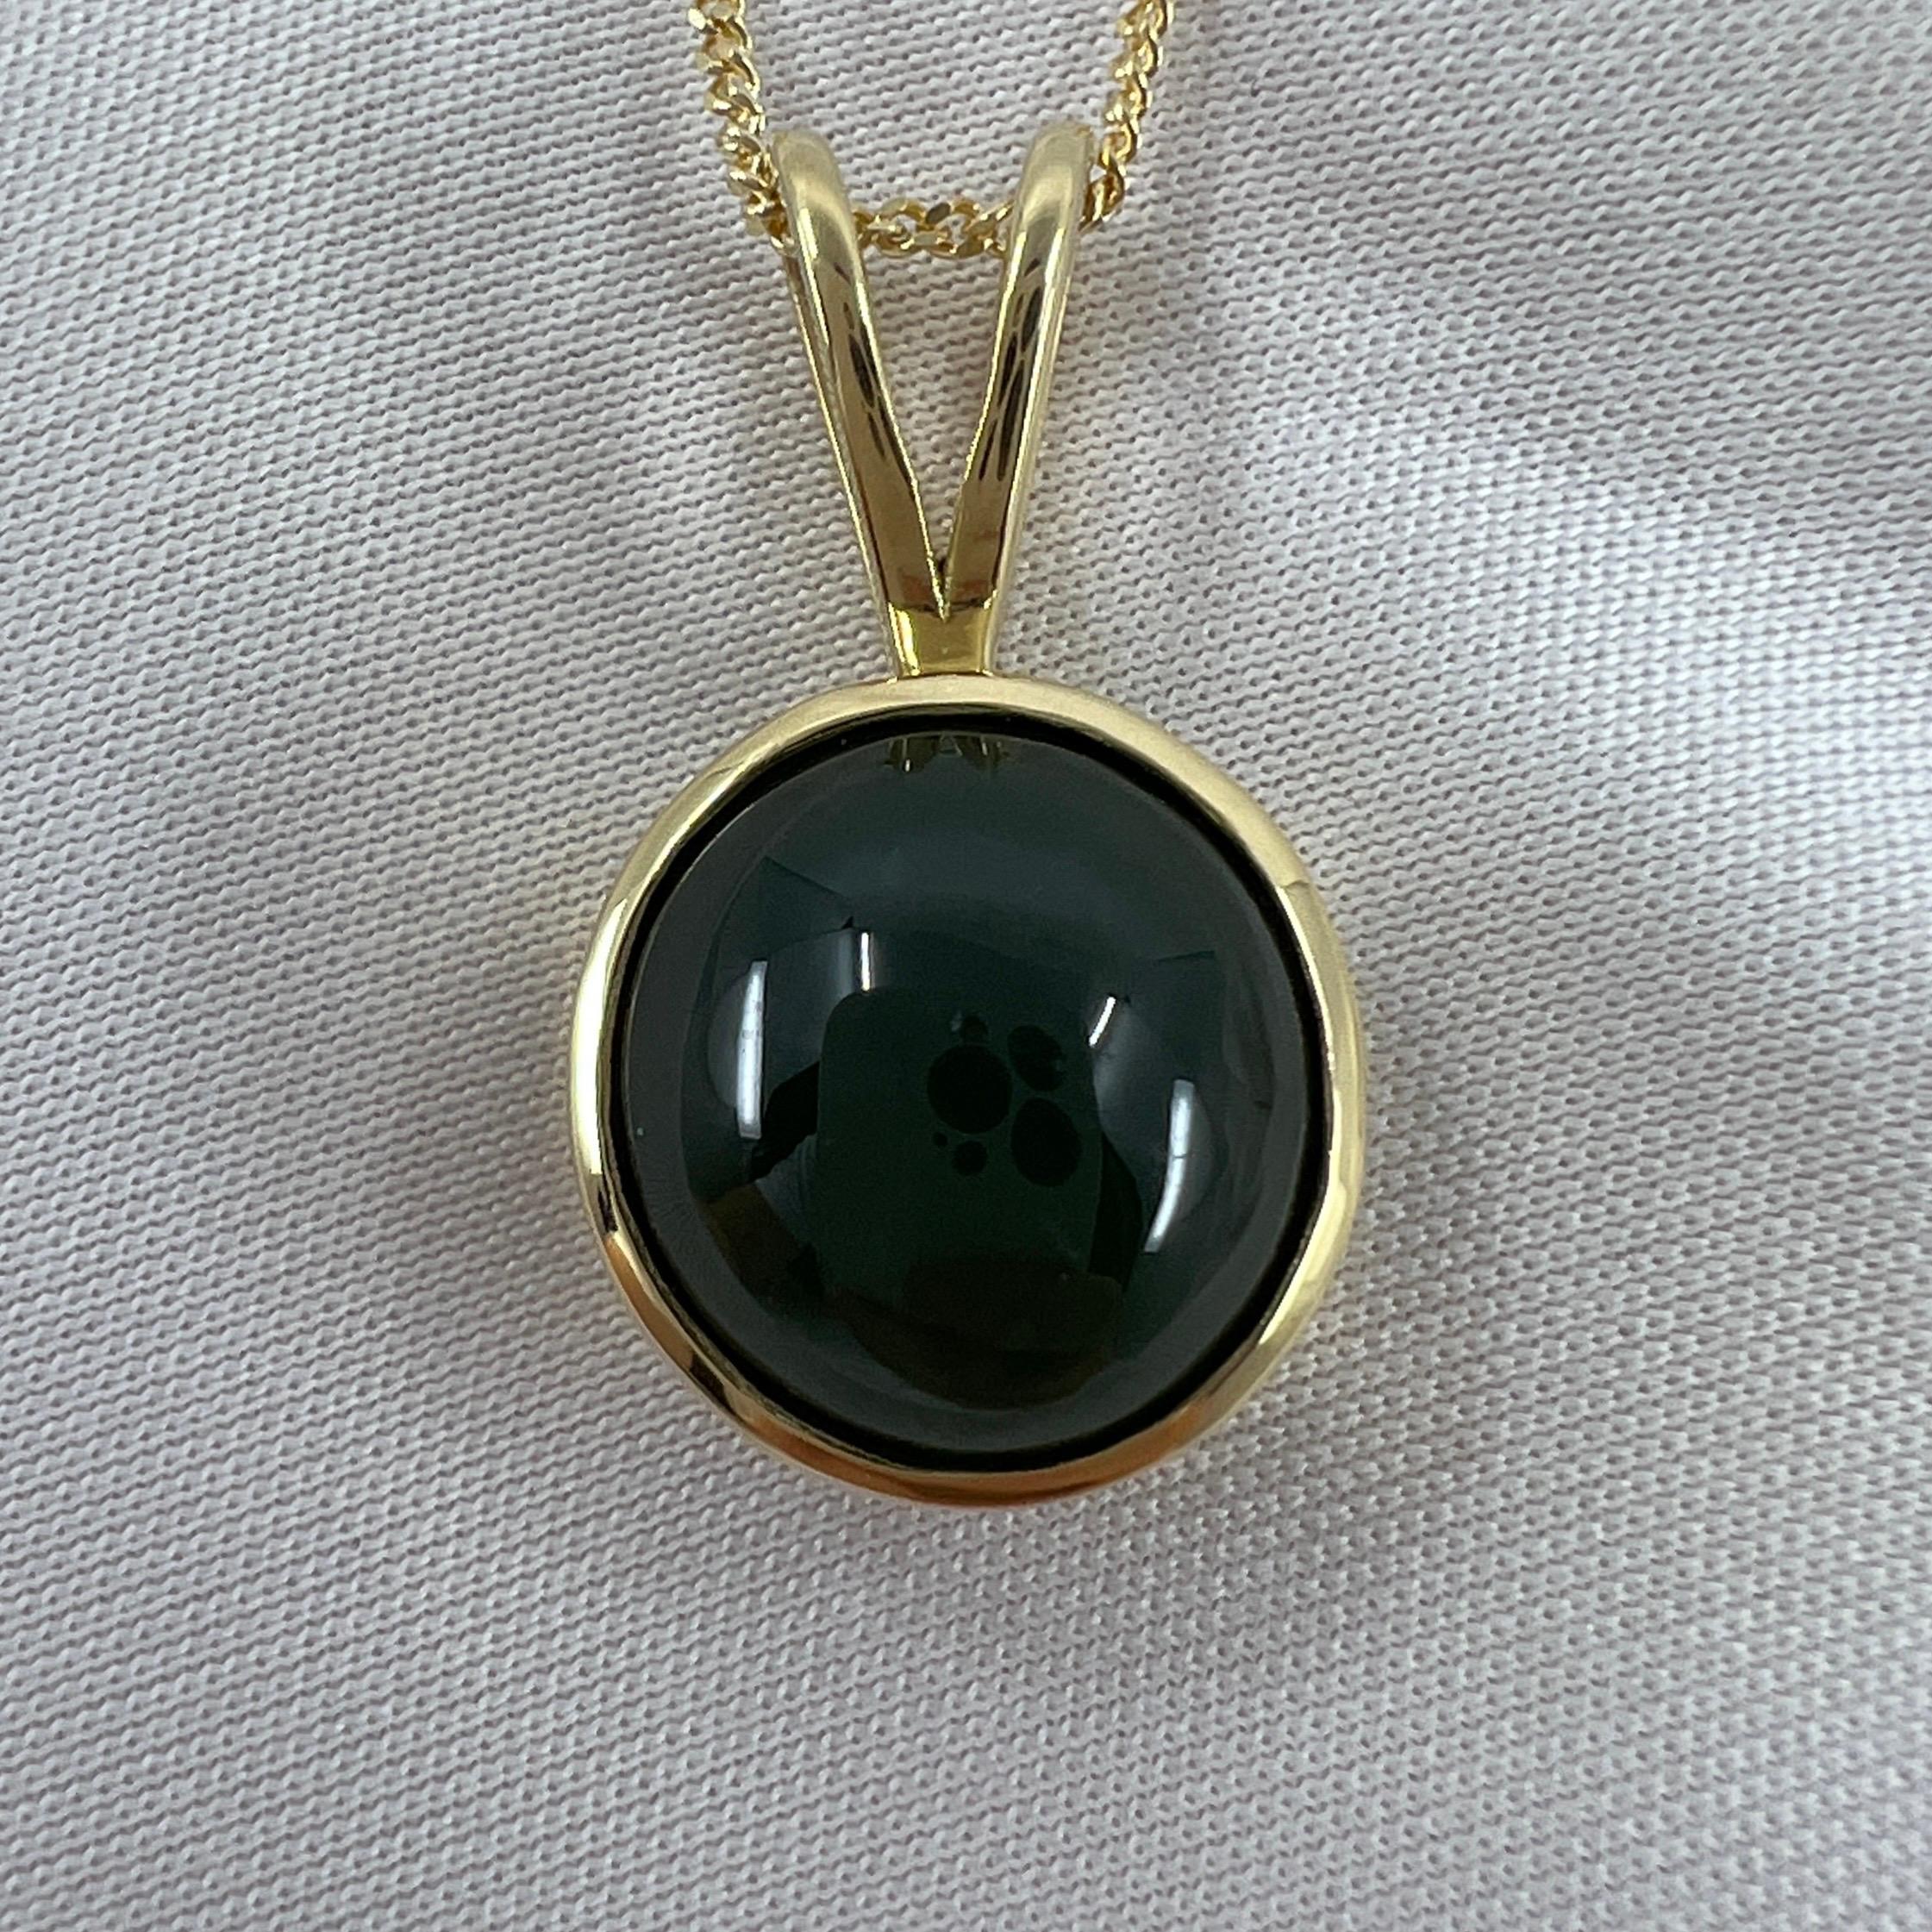 GIA Certified 4.94ct Untreated Deep Green Jadeite Jade A-Grade Pendant Necklace.

Beautiful untreated jadeite stone with a deep green colour and excellent round cabochon cut. 

It's very difficult to photograph cabochons due to how the dome reflects